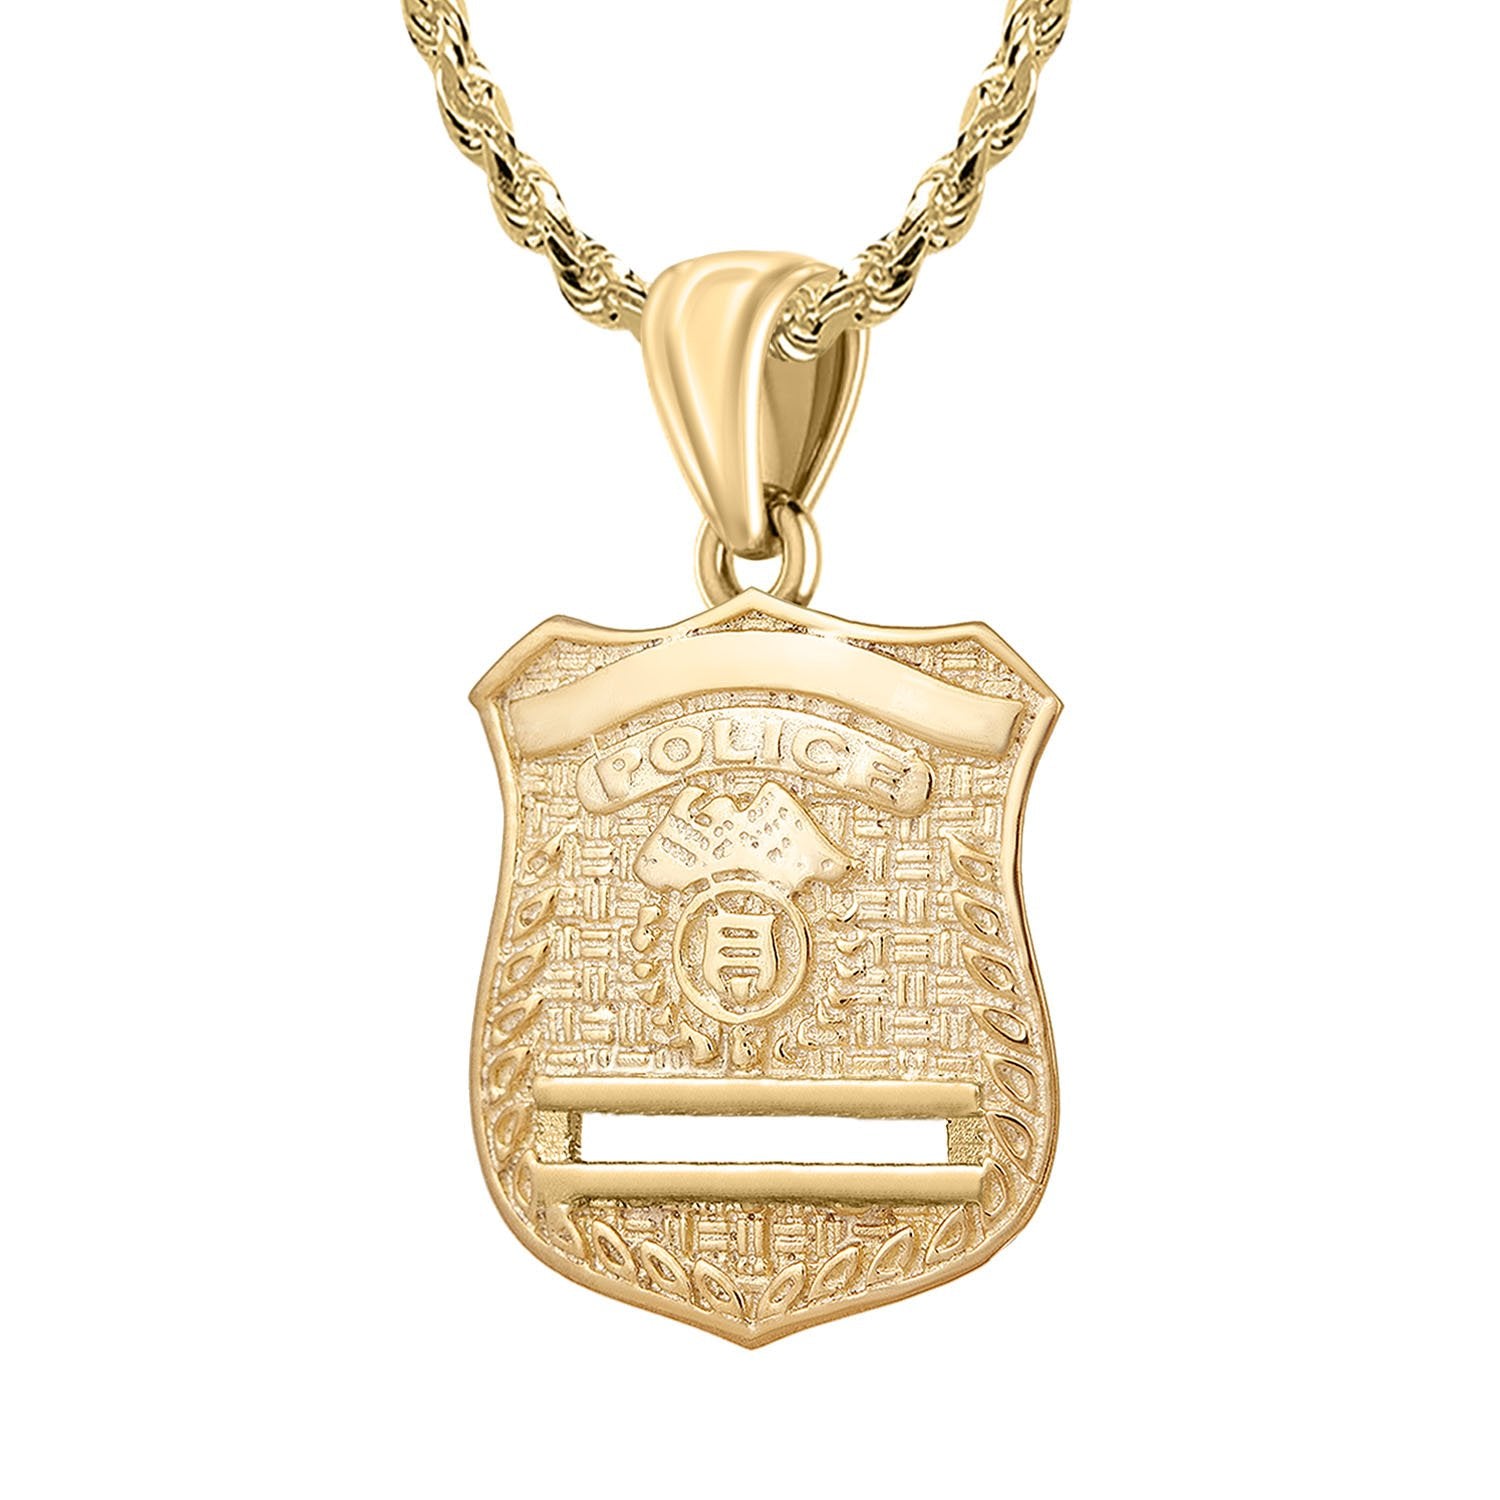 Gold Police Badge Necklace For Men - 2.5mm Rope Chain